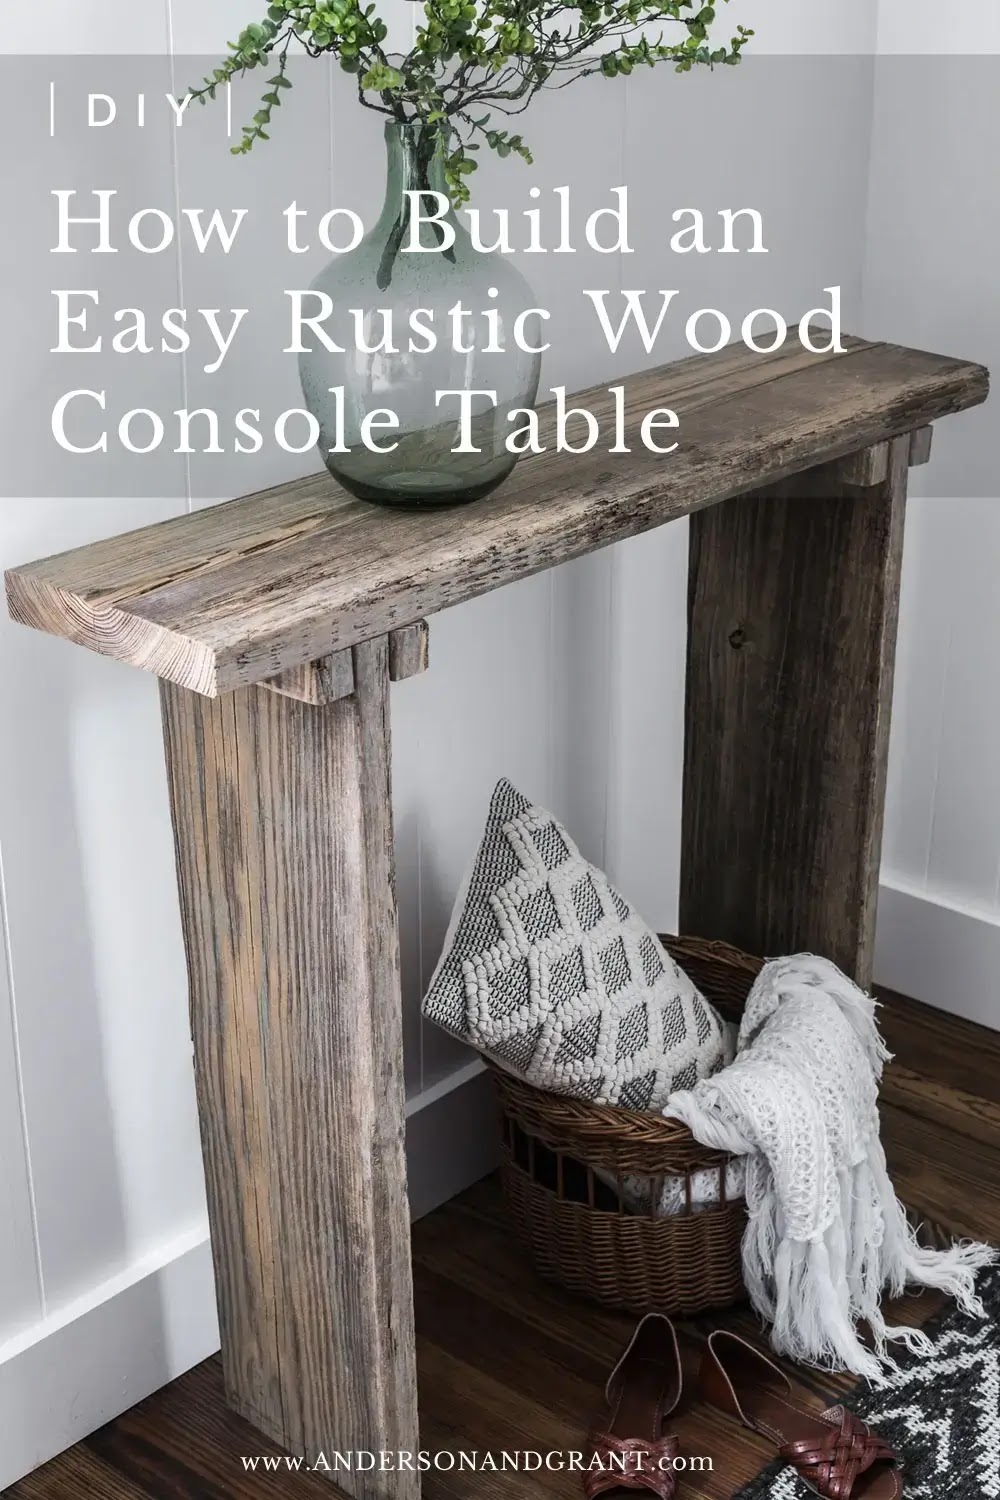 How to Build an Easy Rustic Wood Console Table